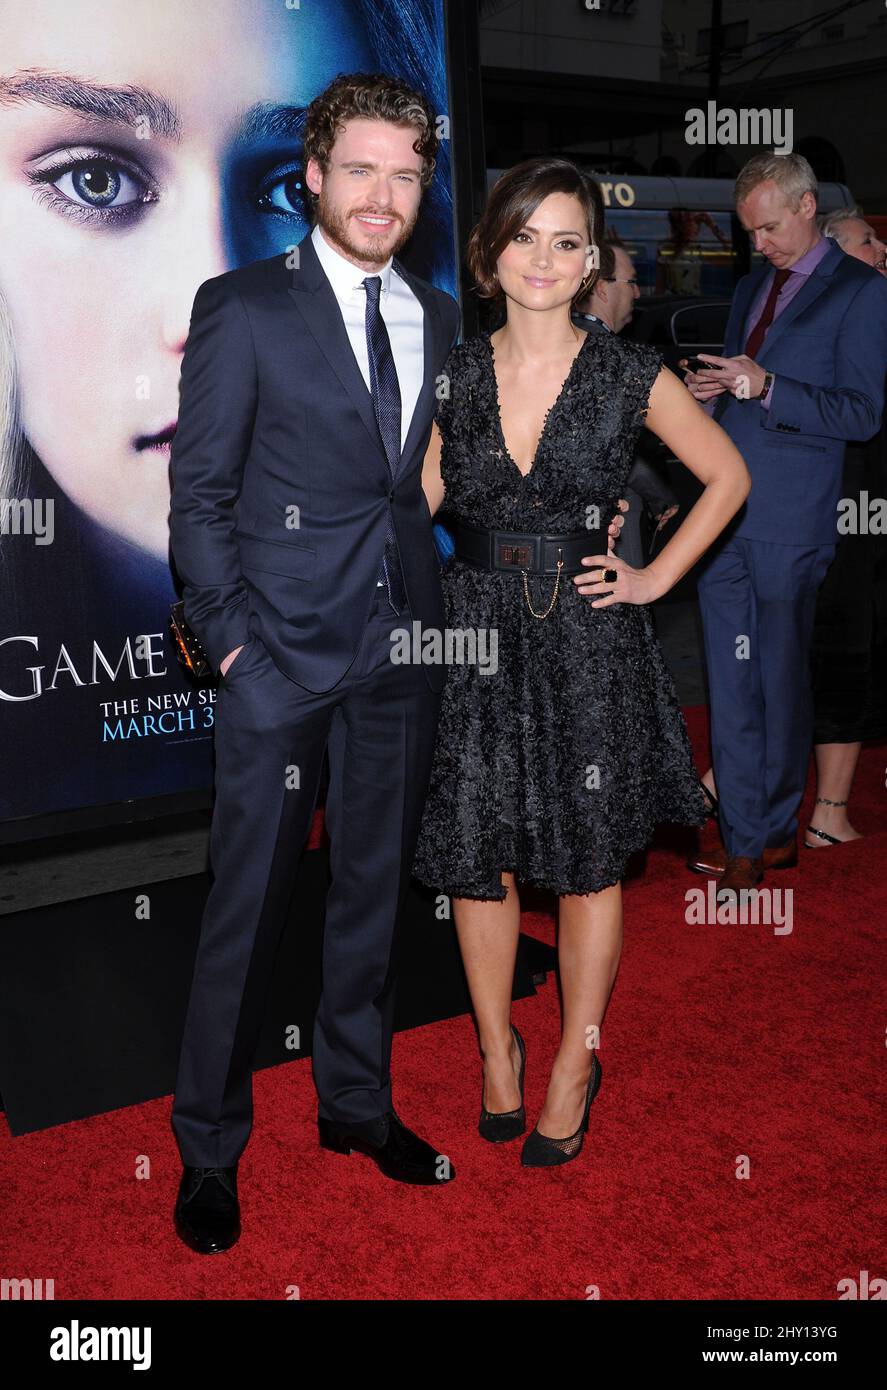 Richard Madden and Jenna-Louise Coleman attending the season 3 premiere of the show 'Game Of Thrones' in Hollywood, California. Stock Photo